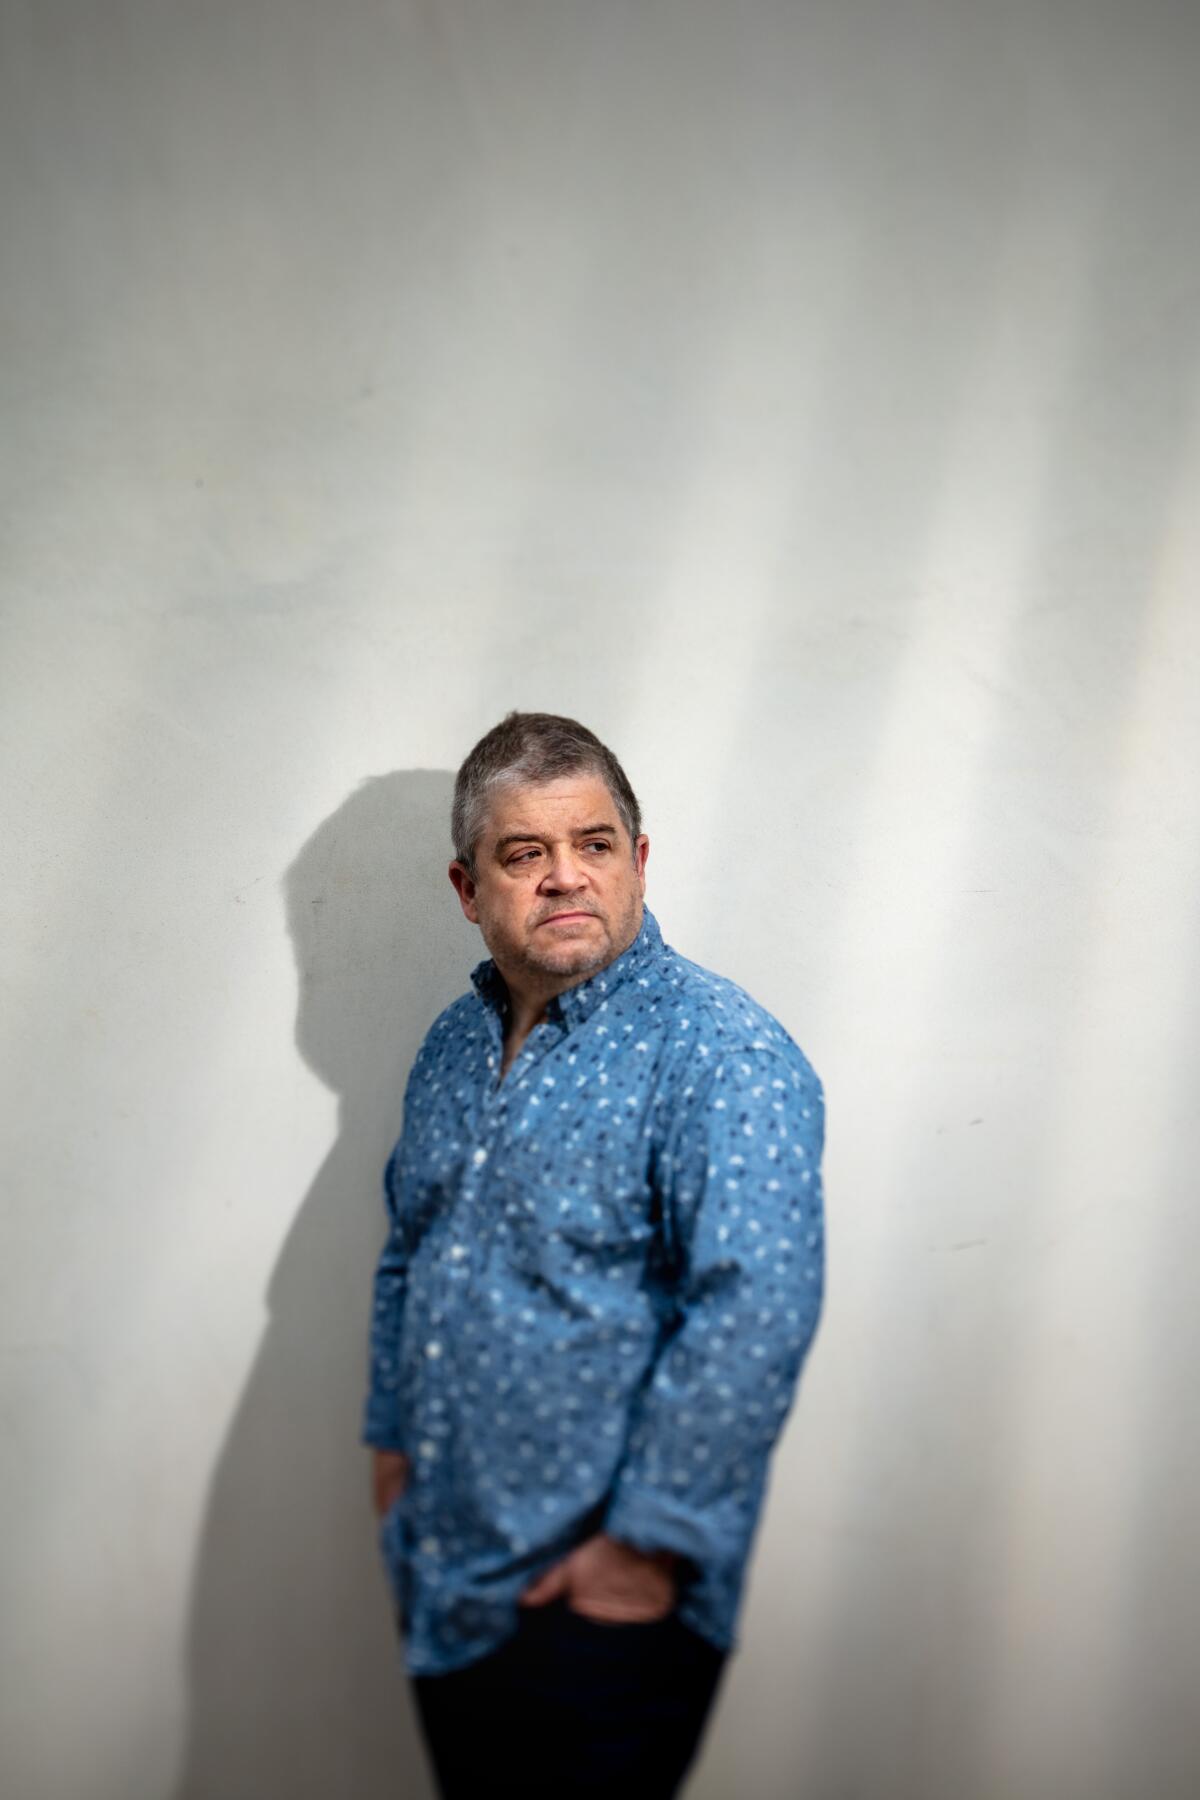 Comedian, actor, writer and producer Patton Oswalt. 